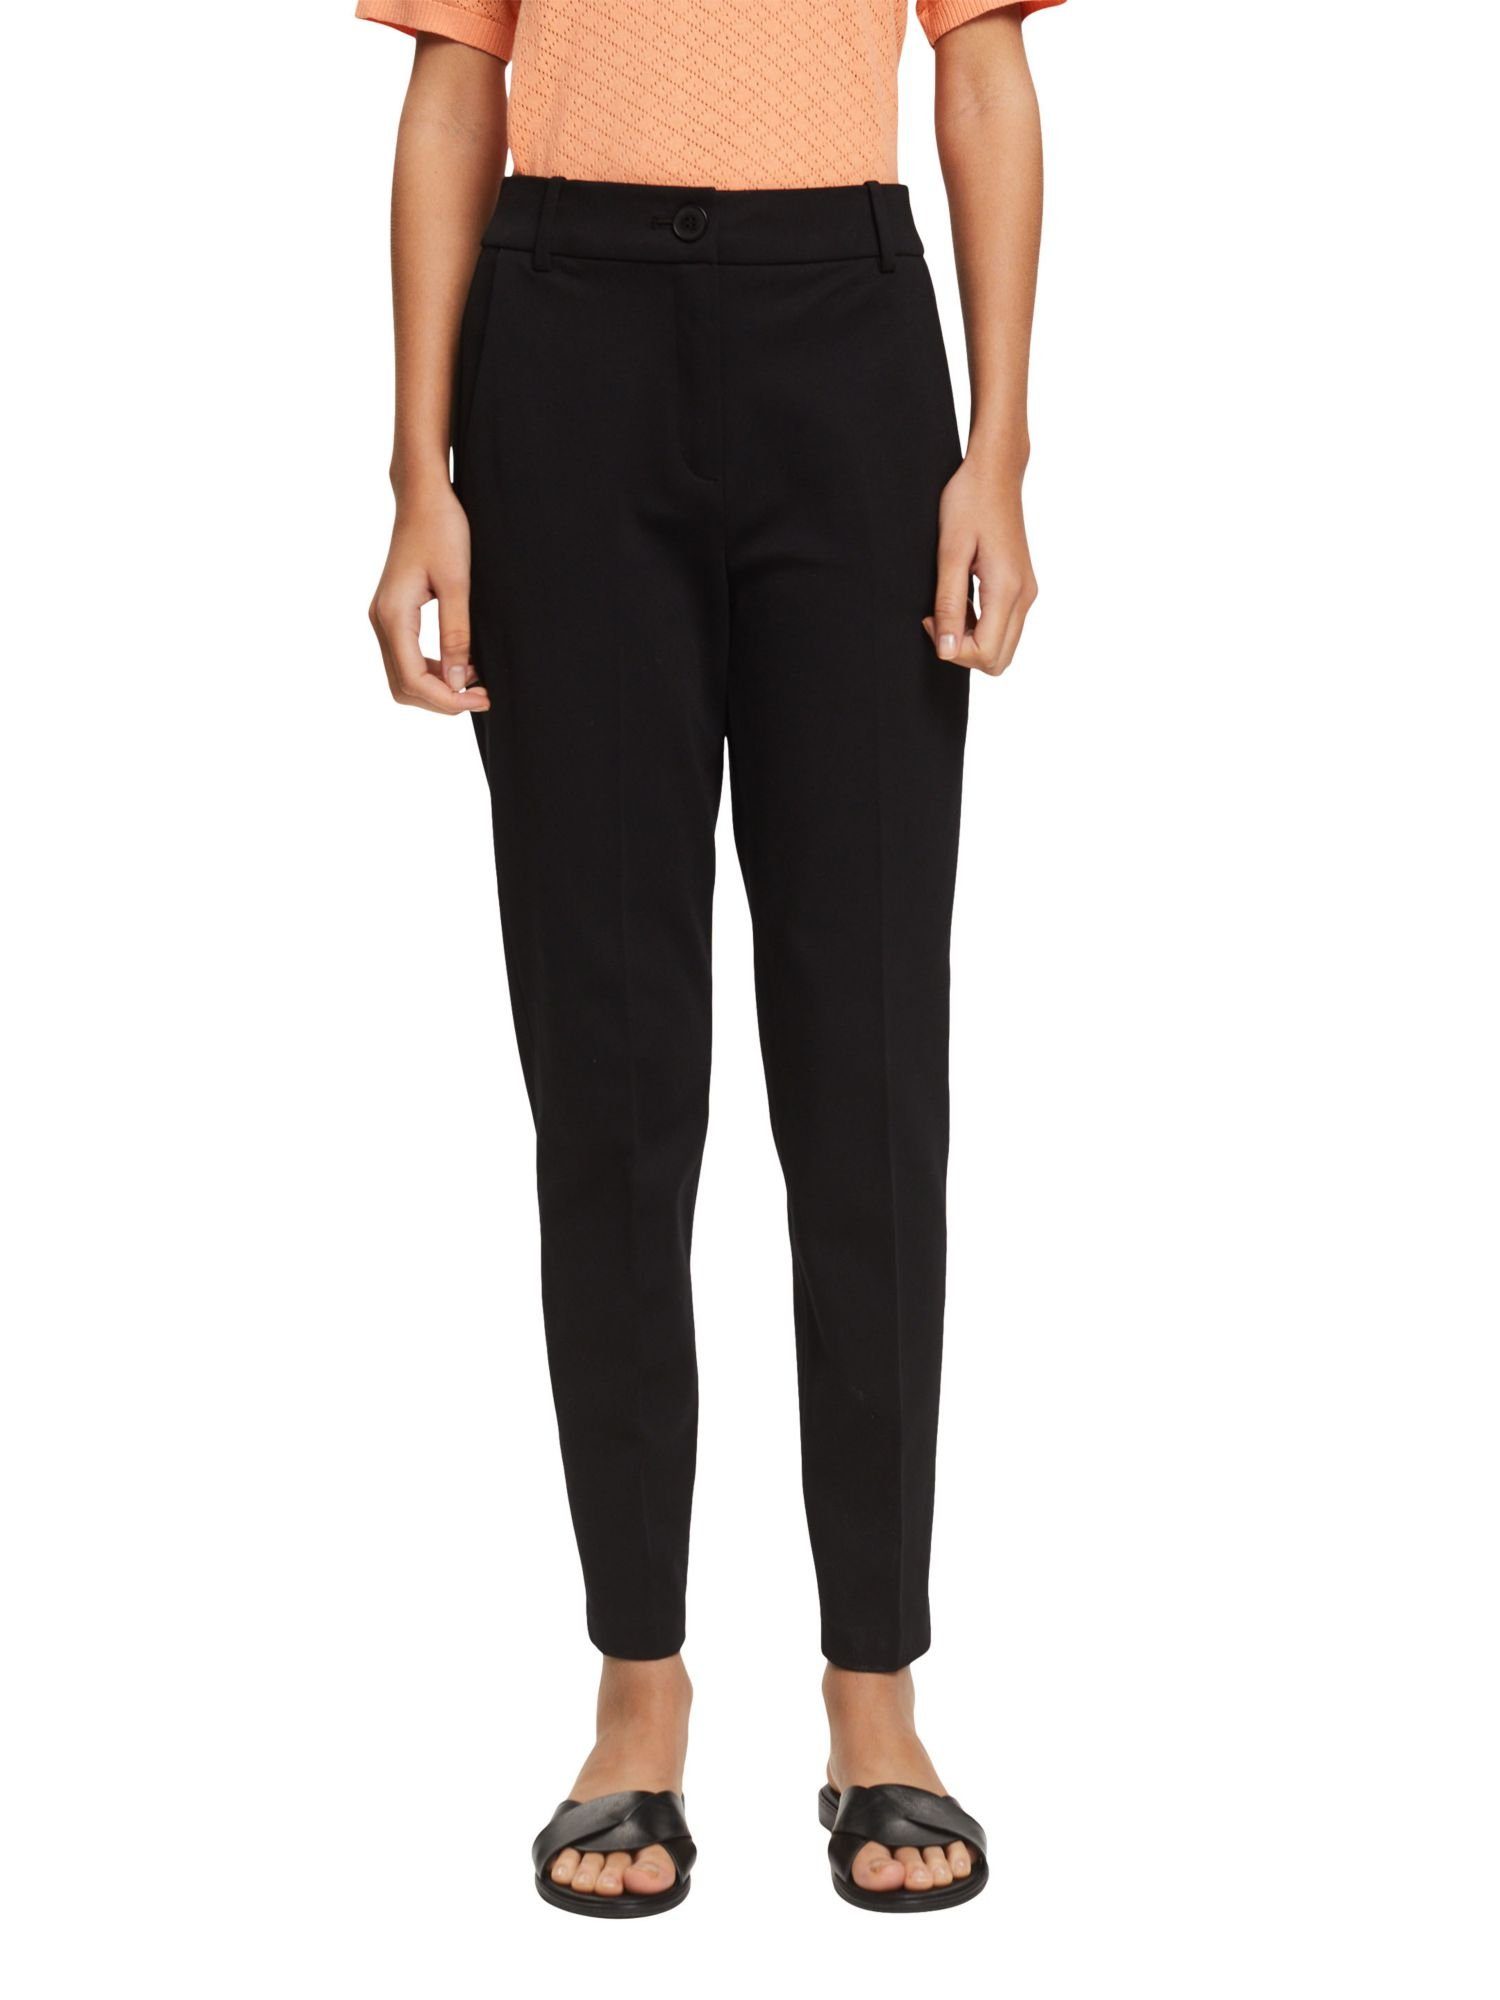 Stretch-Hose BLACK Tapered SPORTY Mix Esprit & PUNTO Match Collection Pants